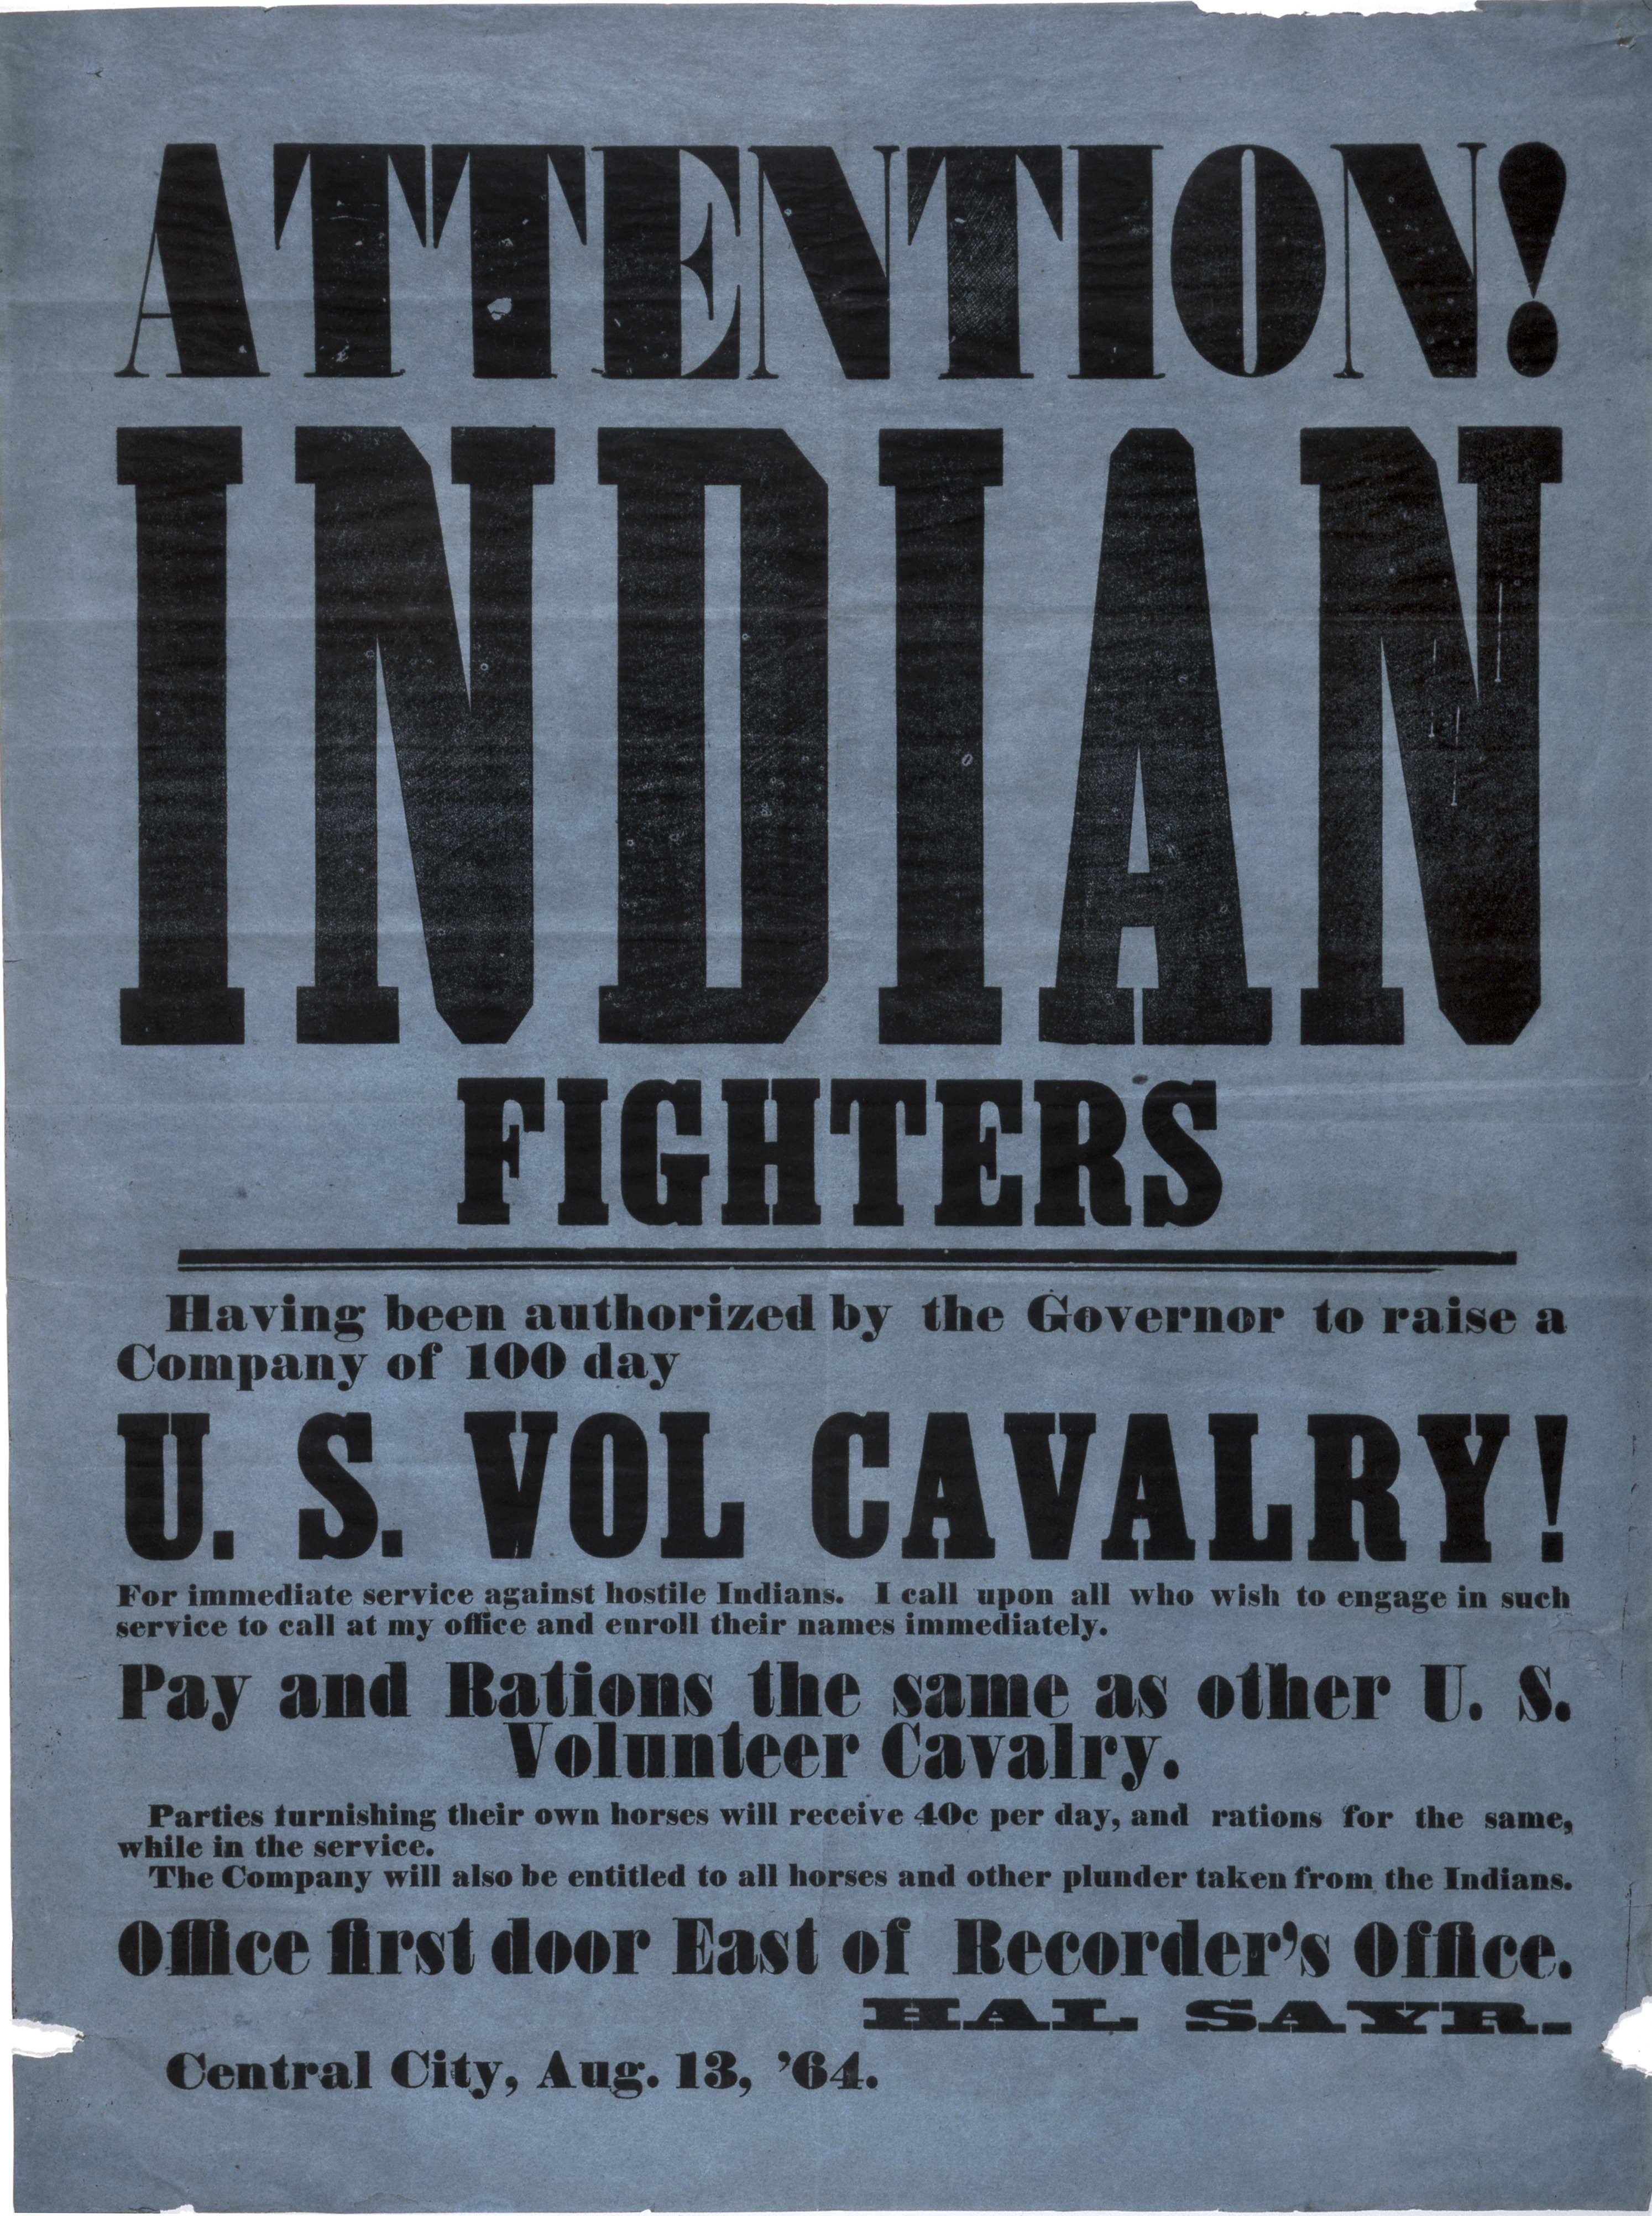 Image of a historic poster. In large, bold black lettering, the poster reads: "ATTENTION! INDIAN FIGHTERS having been authorized by the Governor to raise a company of 100 day U.S. Vol Cavalry! For immediate service against hostile Indians." The poster continues on with details and ends with the date "Central City. Aug. 13, '64"